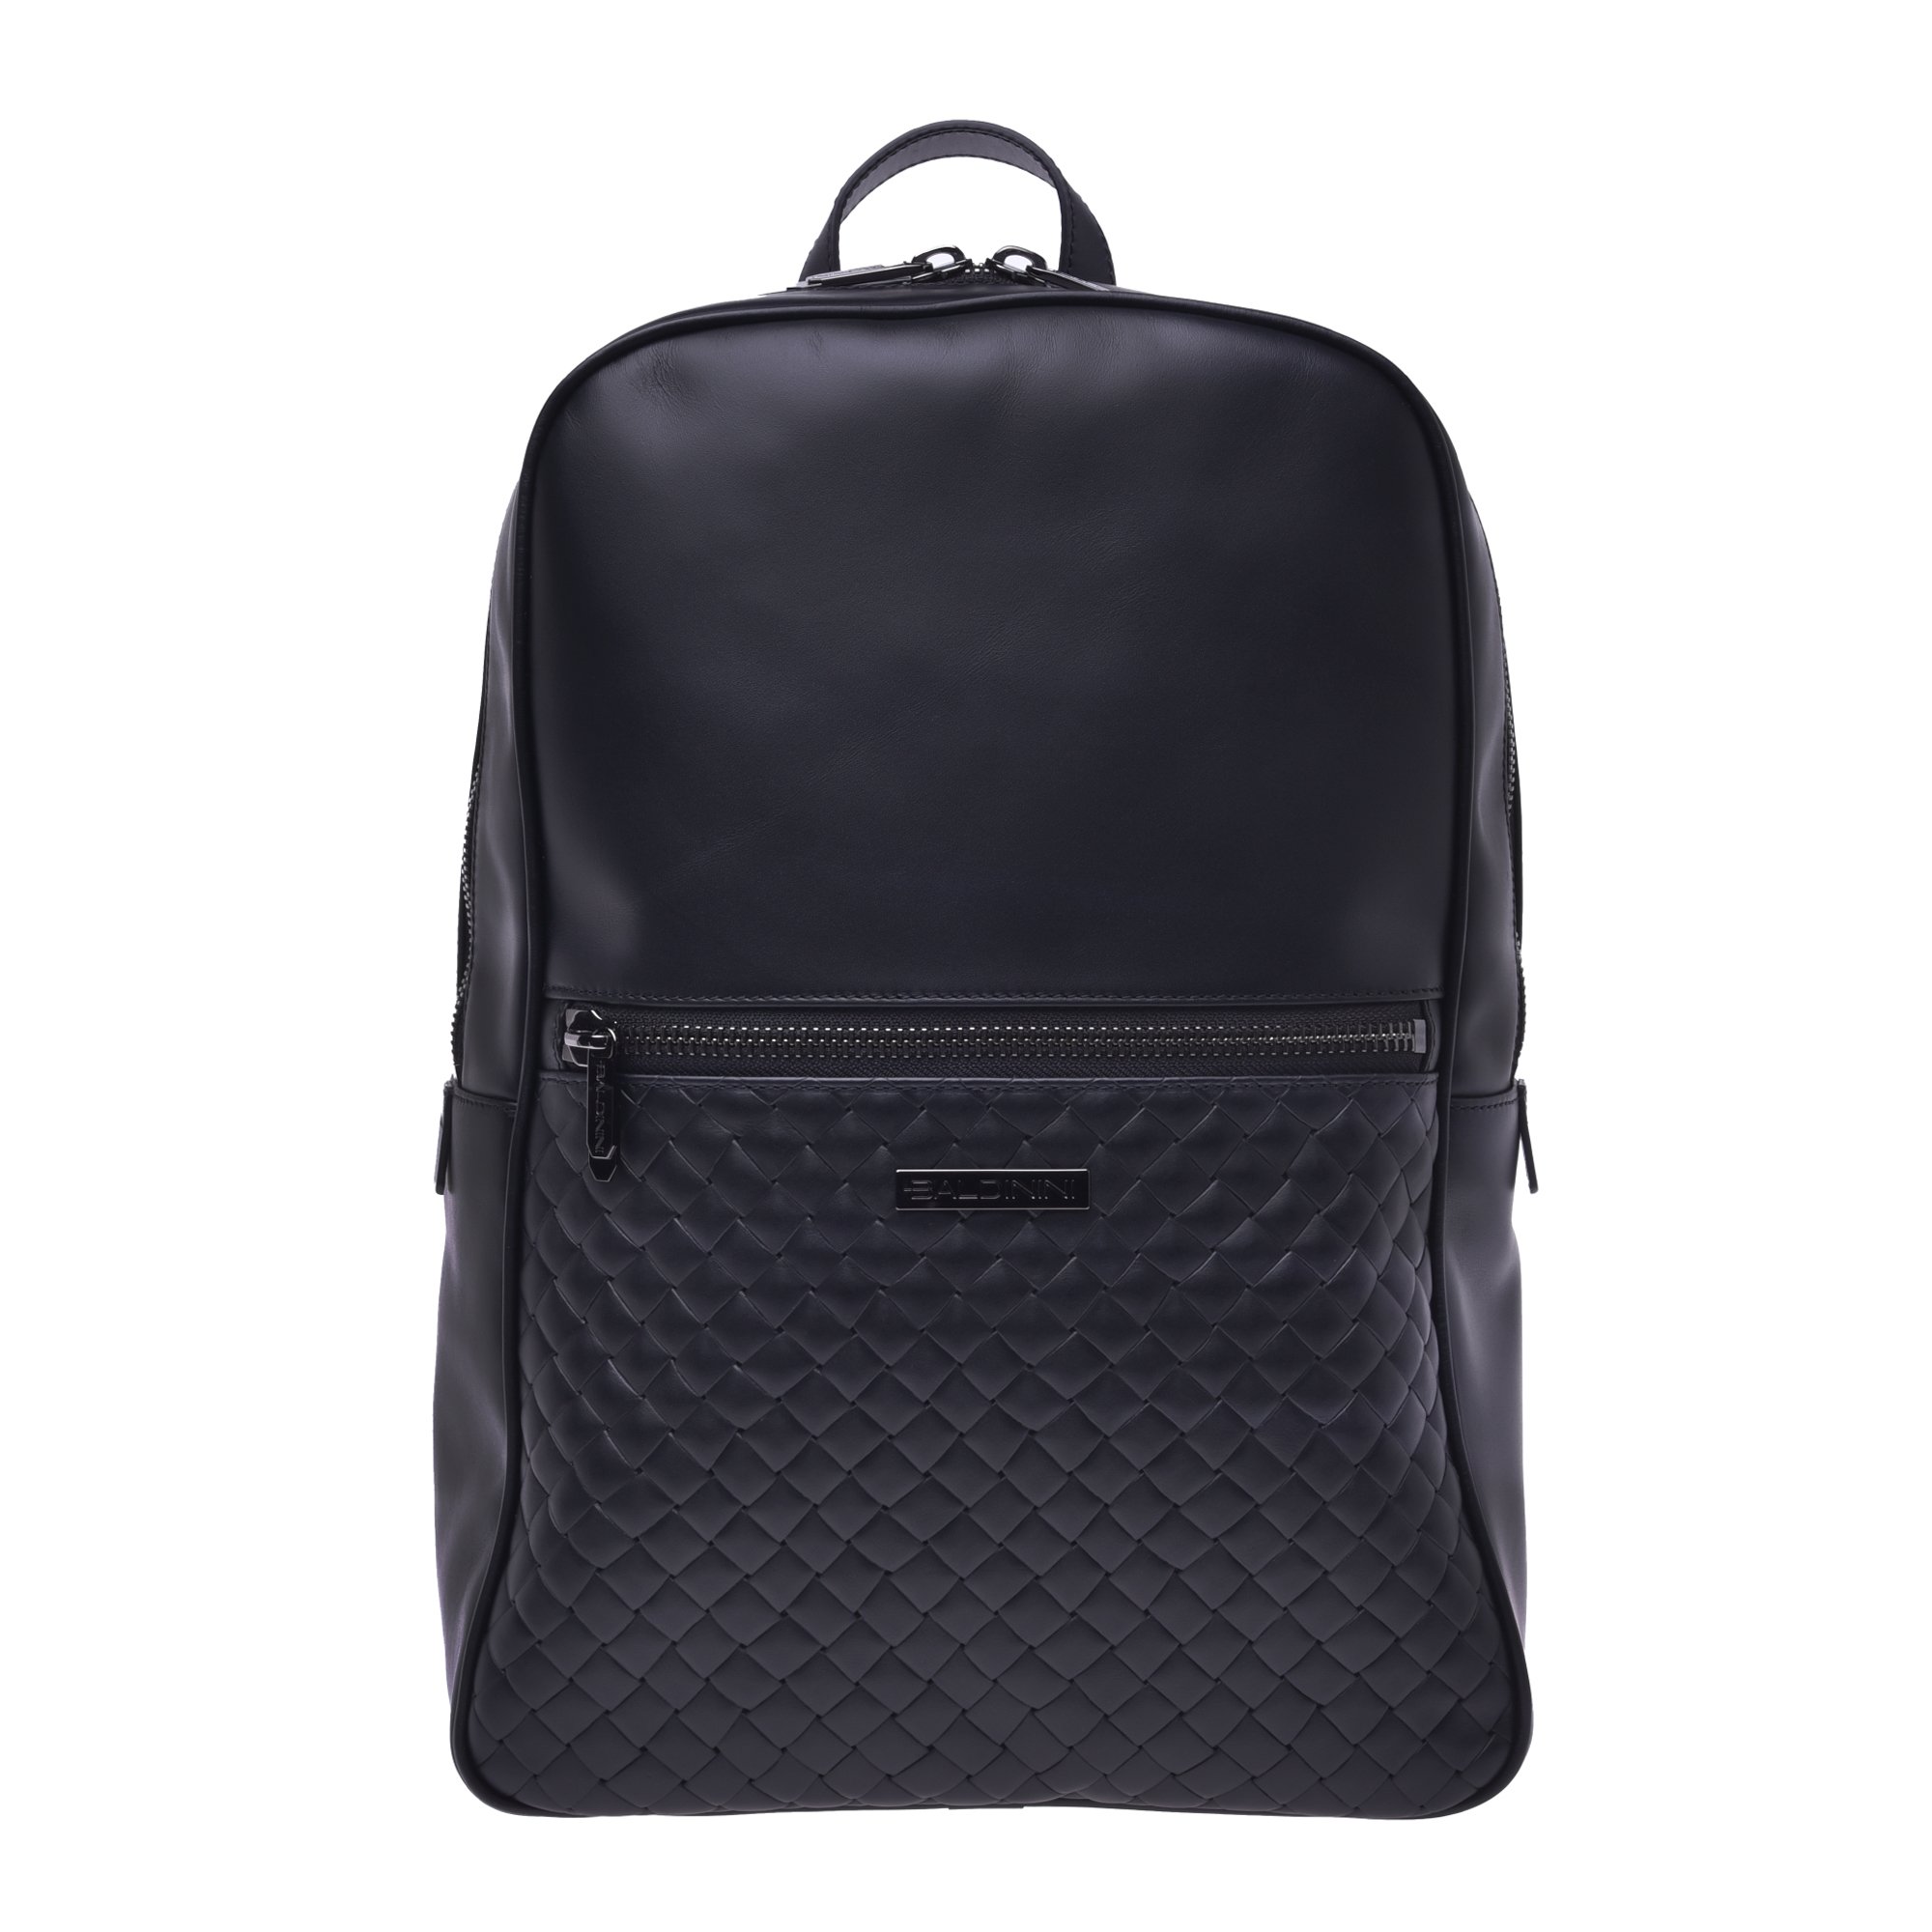 Backpack in black woven leather image